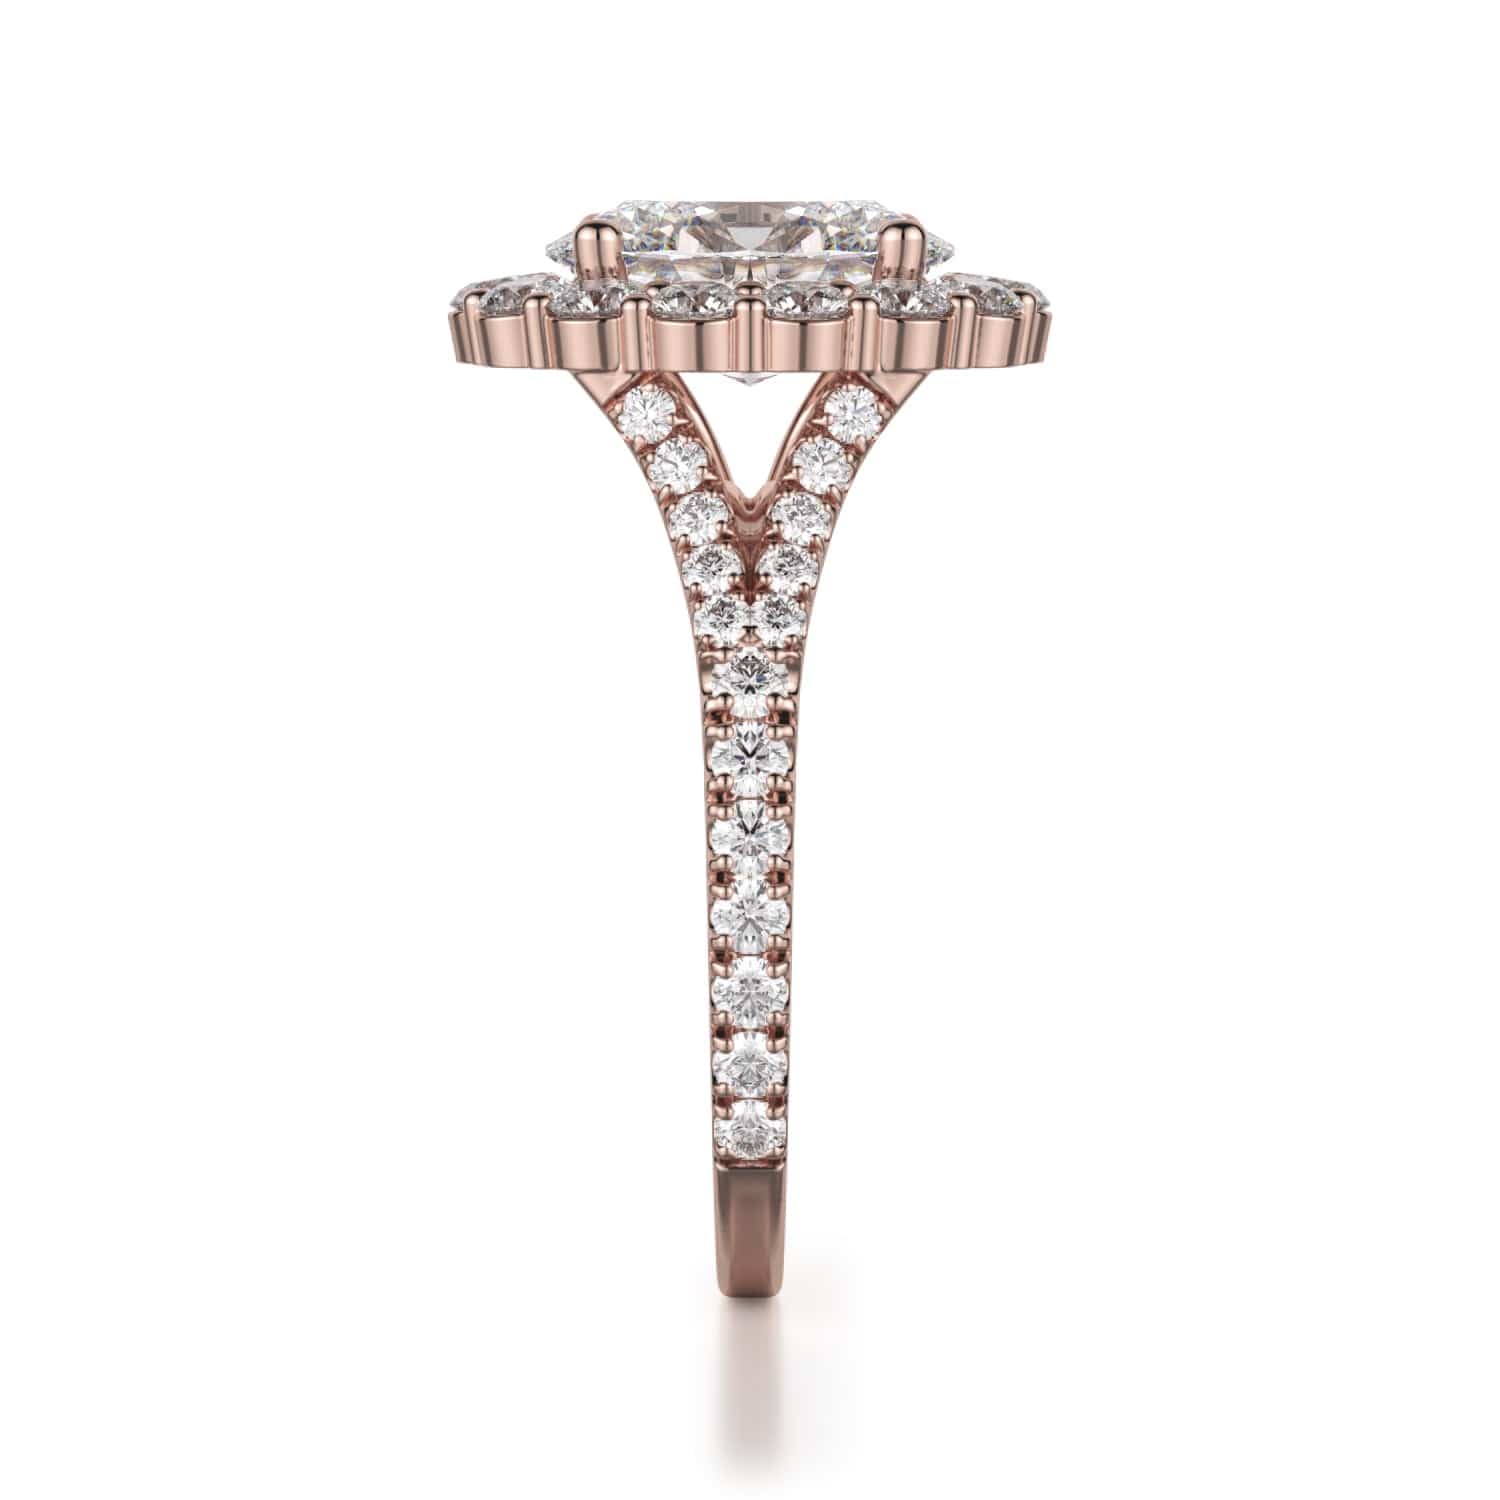 MICHAEL M Engagement Rings Defined R779-2.5